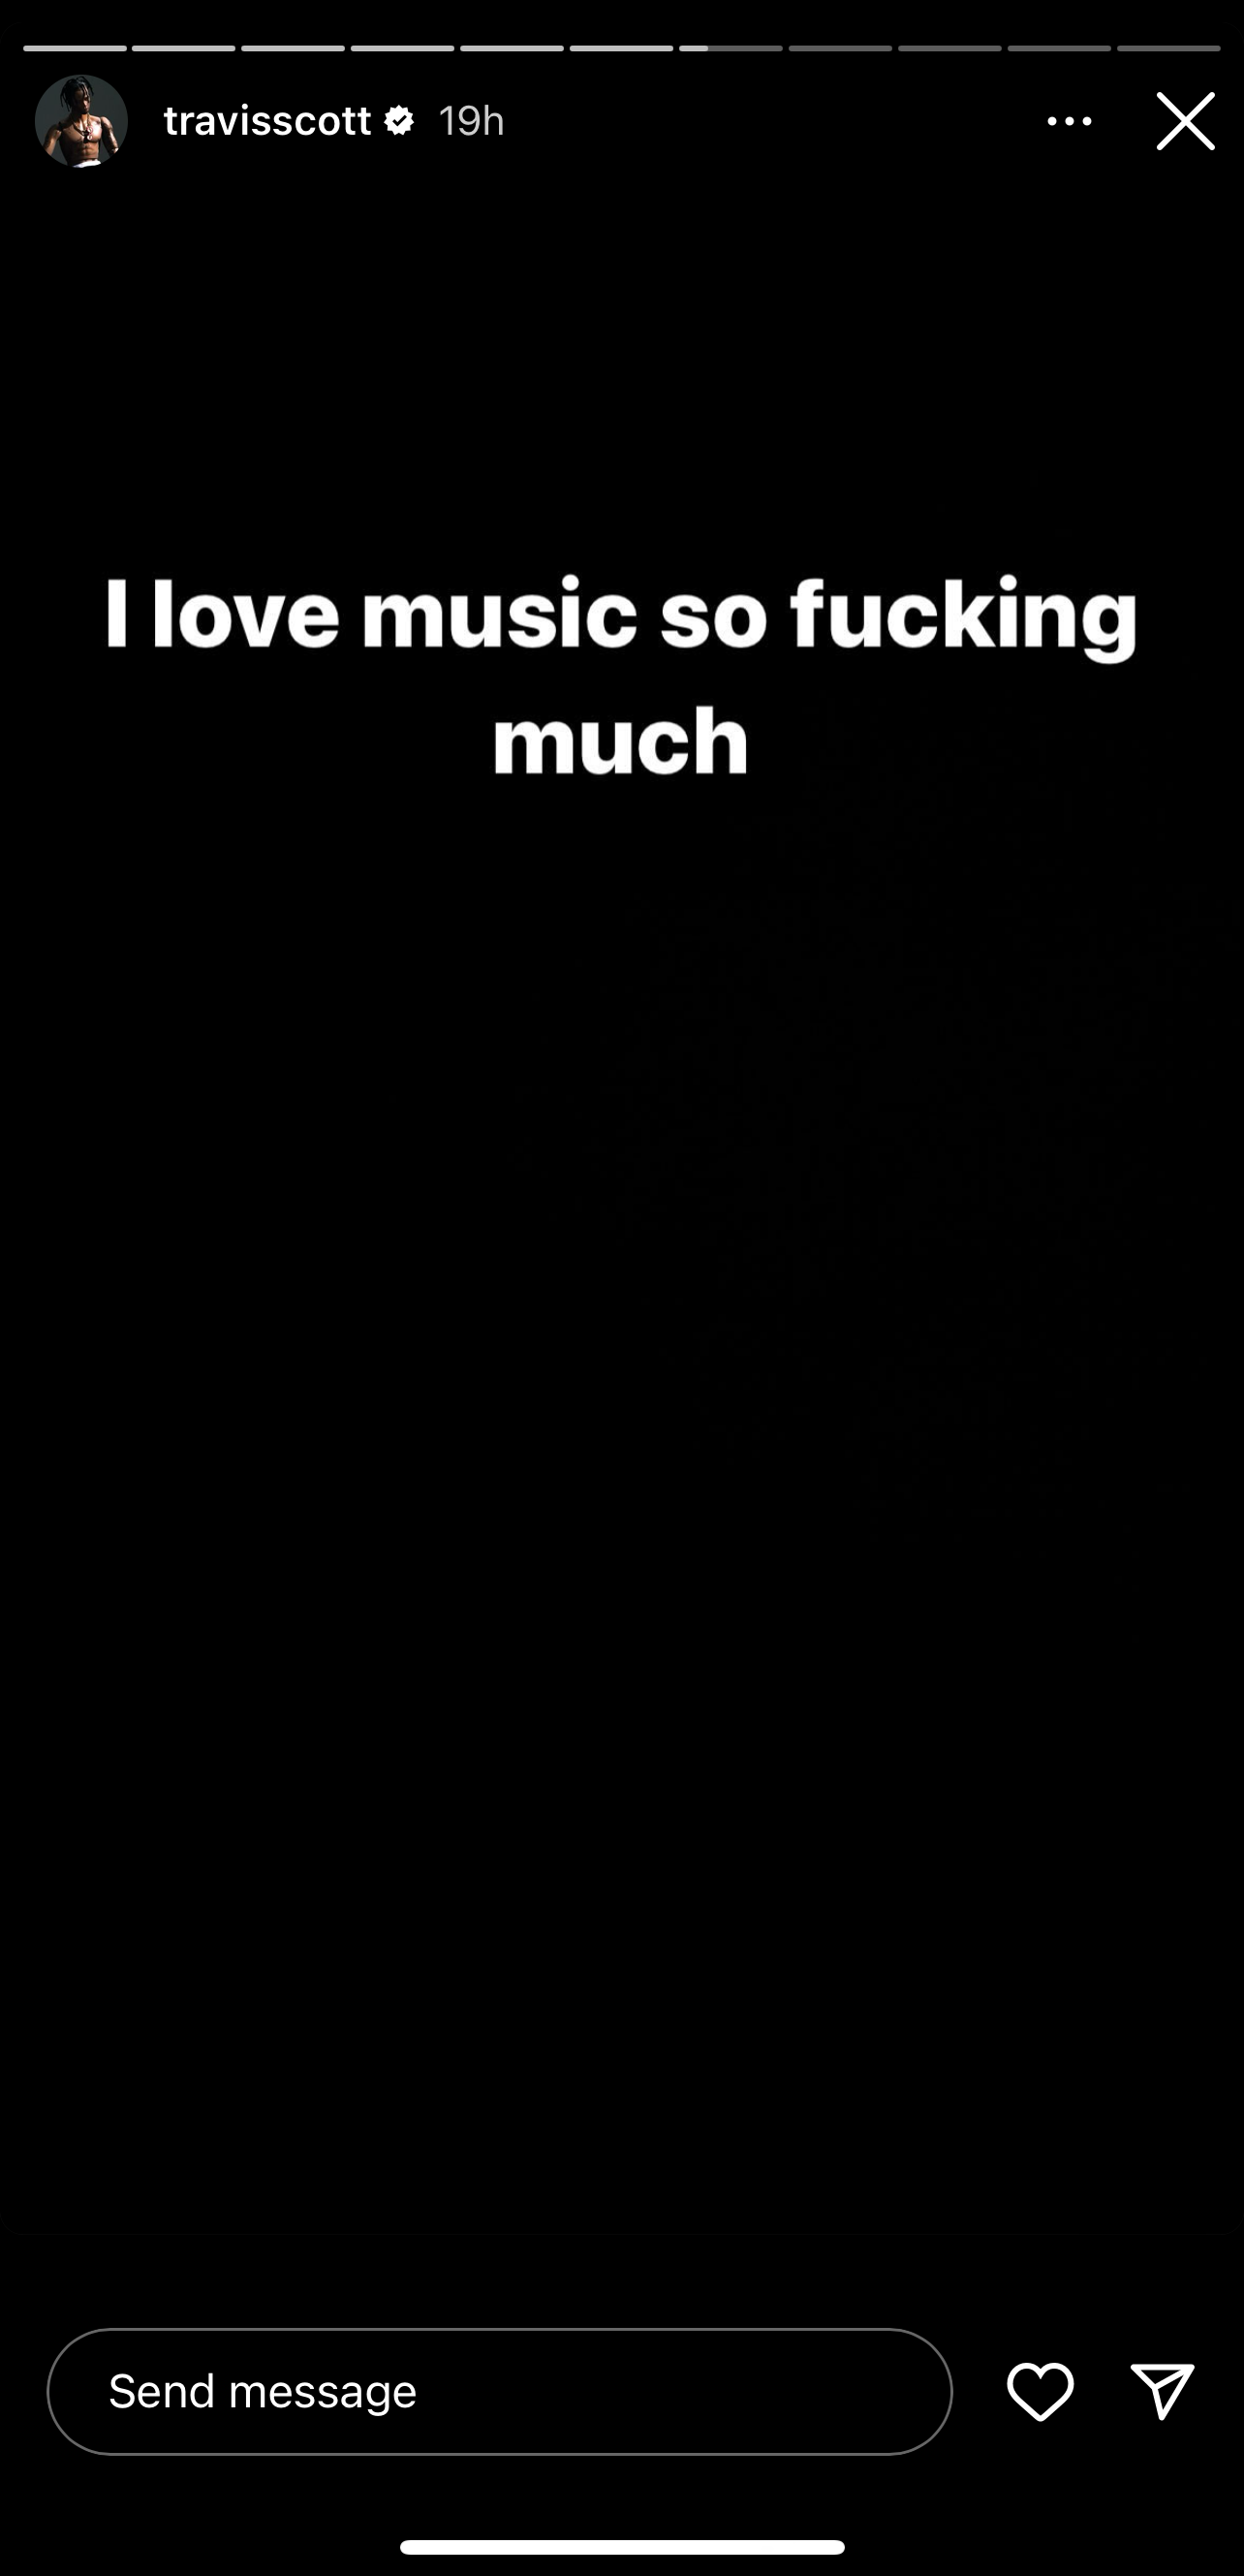 Travis Scott&#x27;s Instagram story update with text &quot;I love music so f***ing much&quot; on a black background